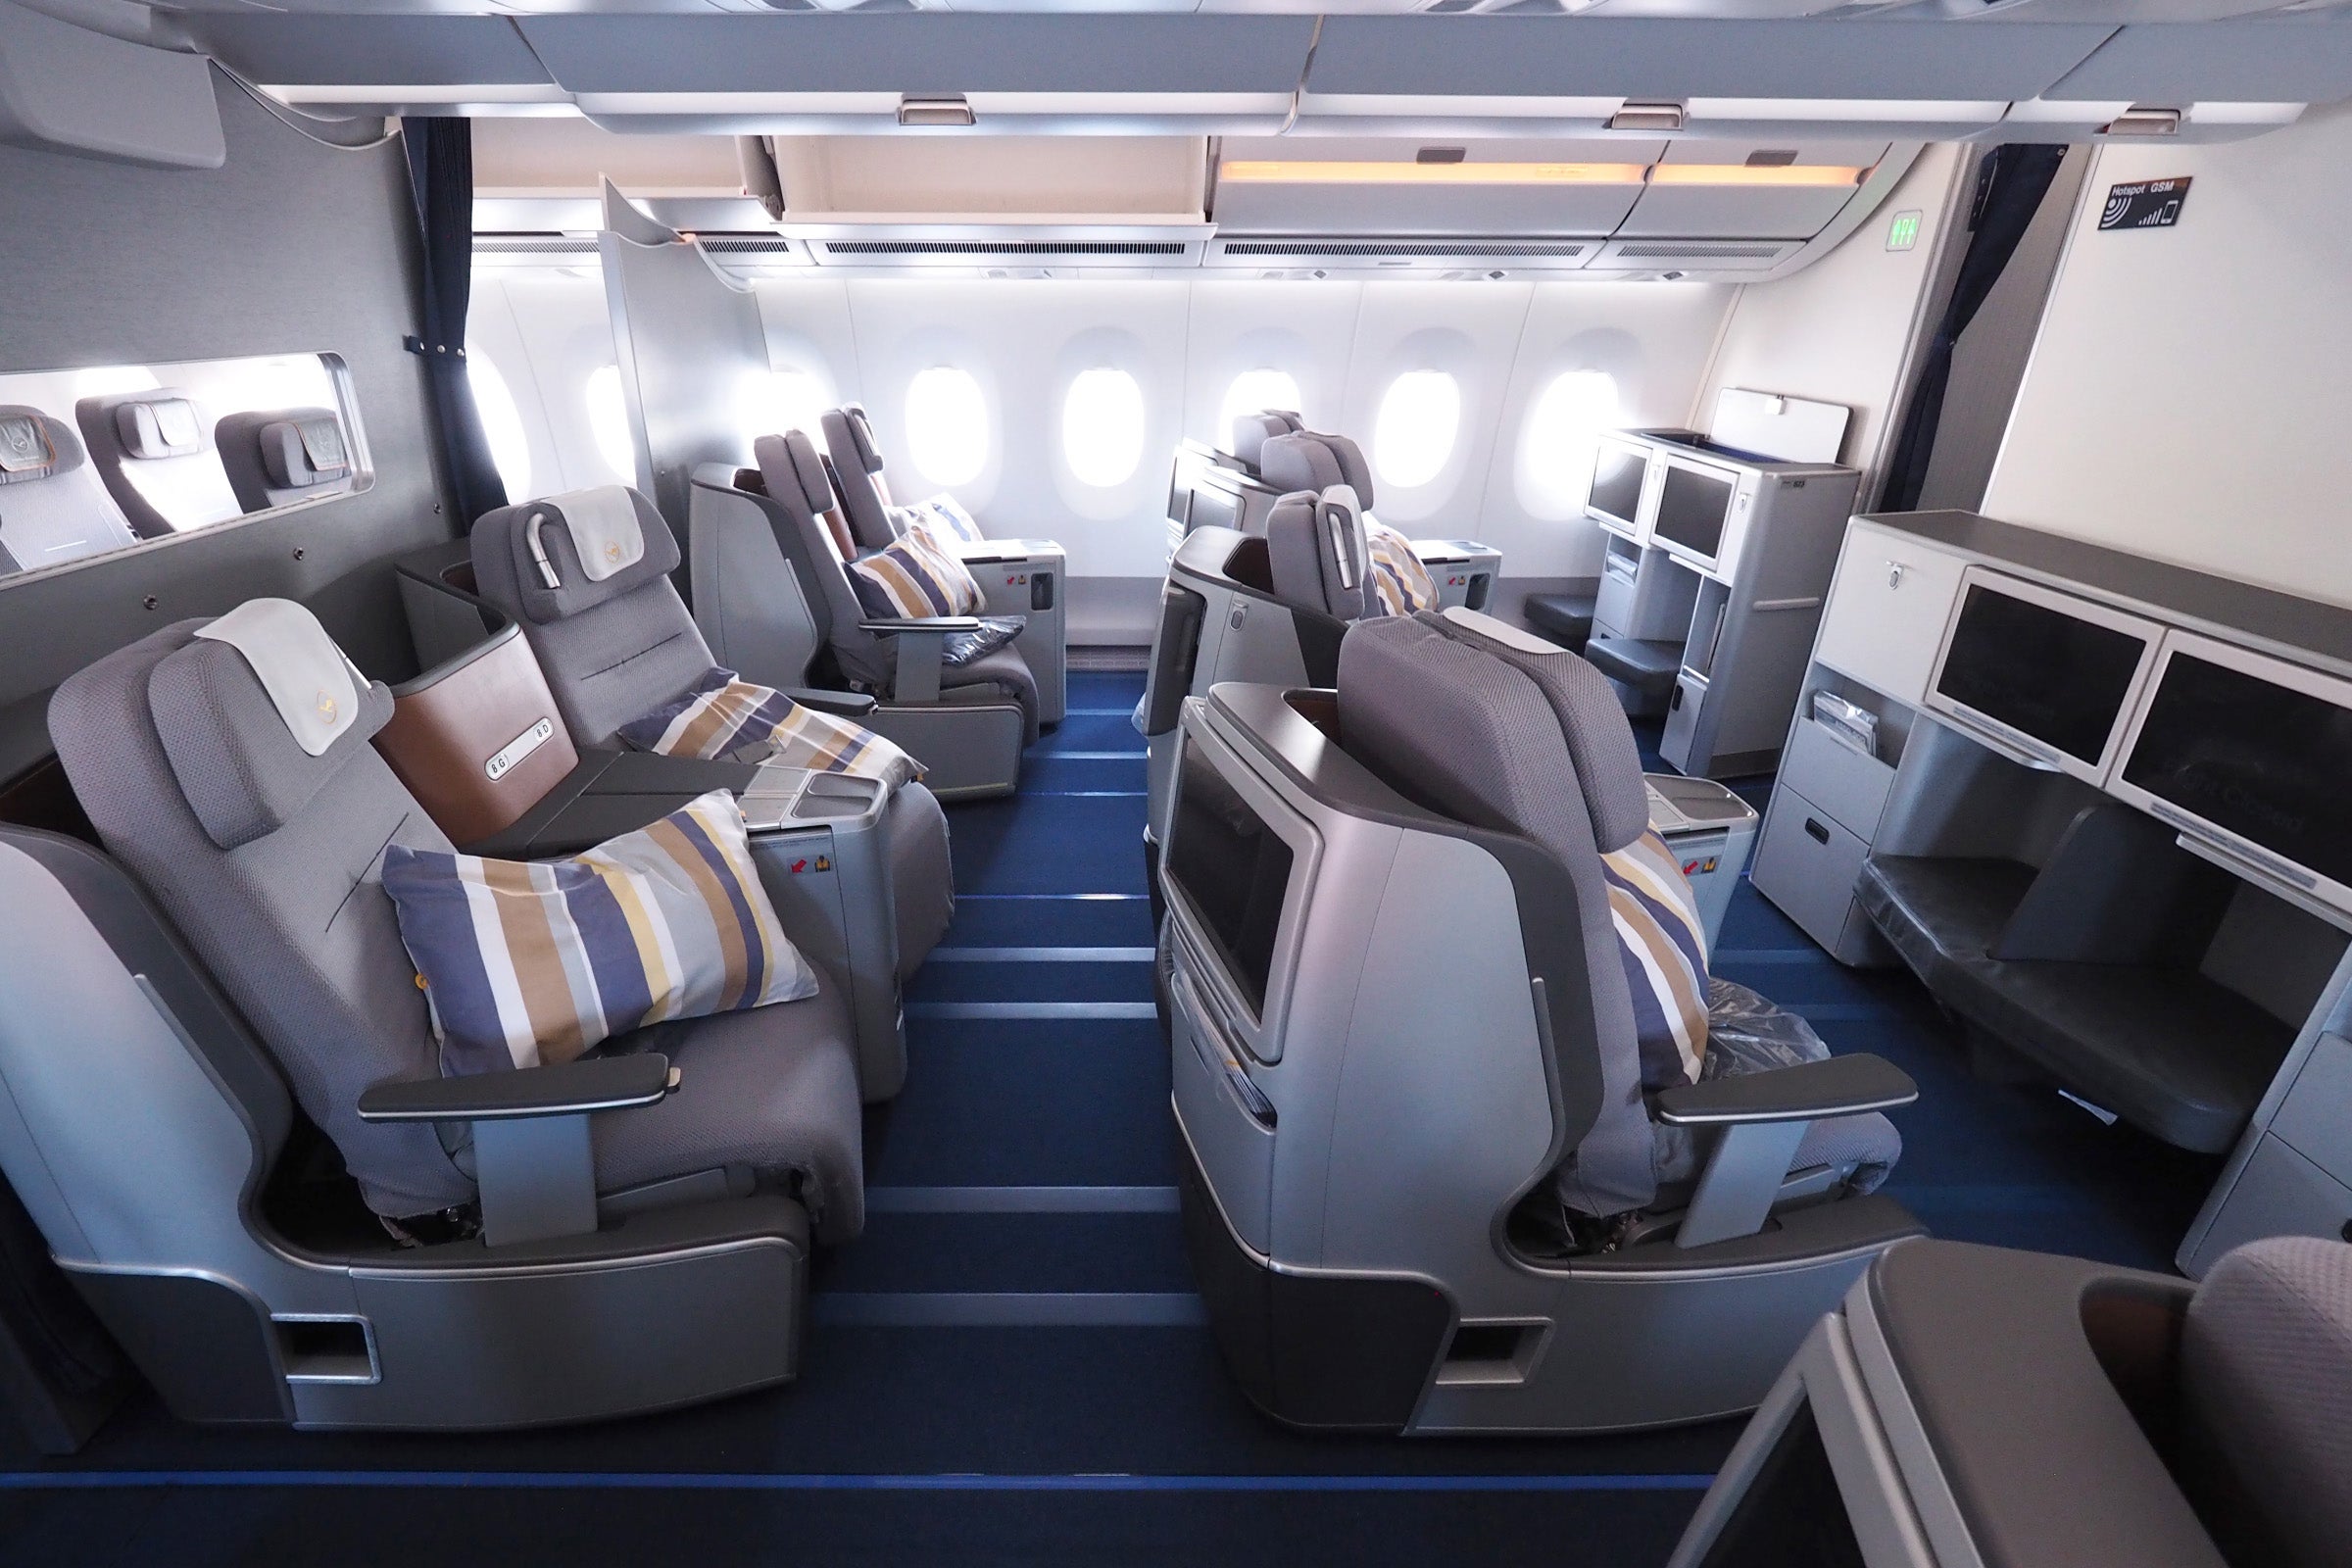 New Lufthansa A350s come with upgraded business class cabin